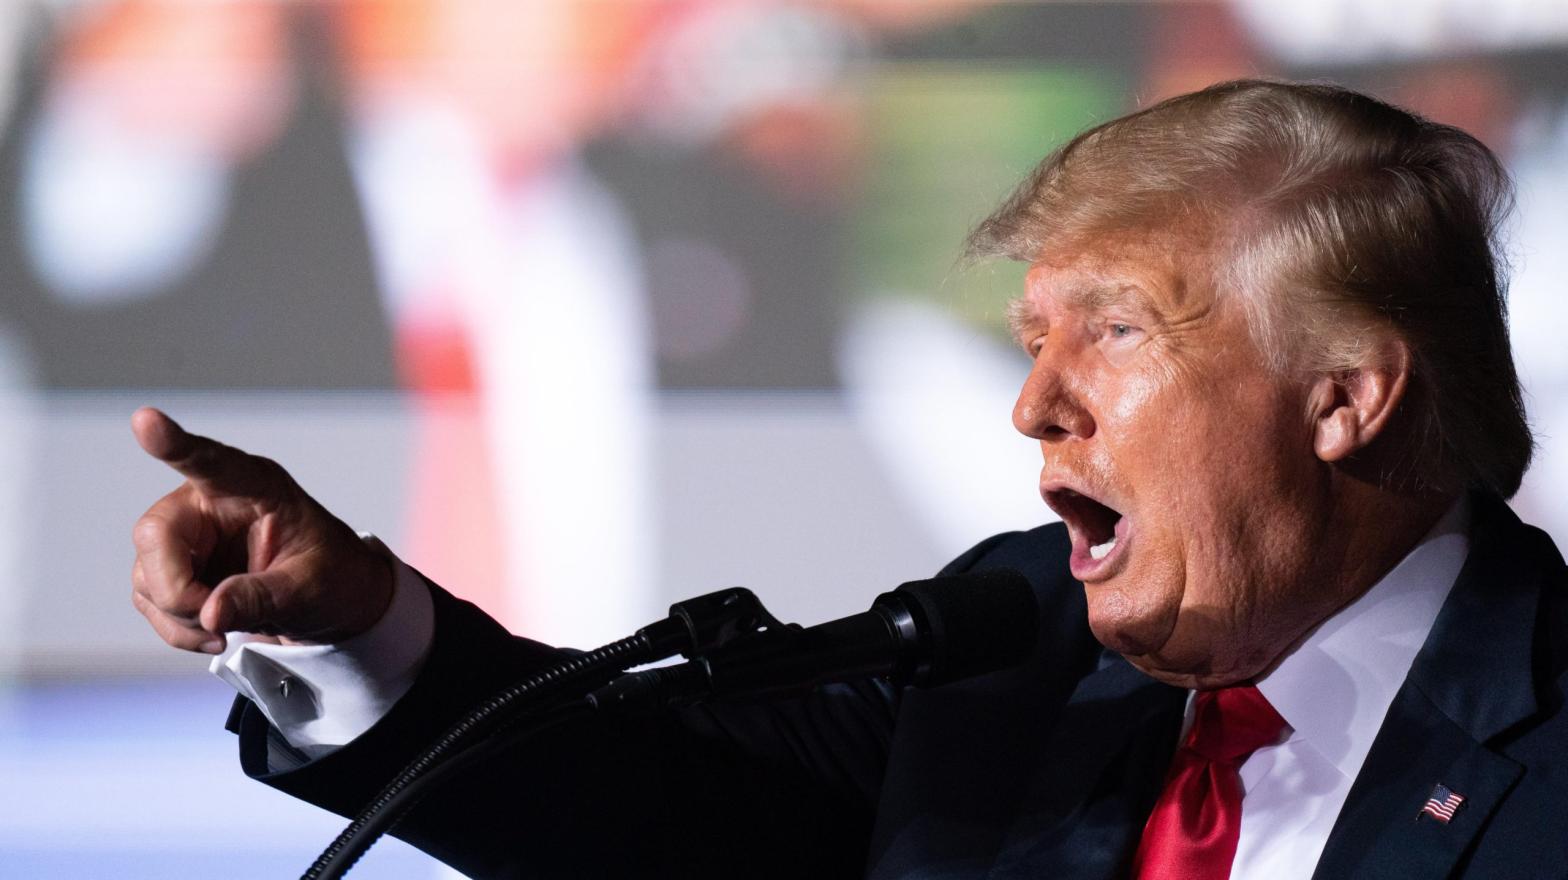 Former President Donald Trump speaks at one of his neo-fascist rallies on September 25, 2021 in Perry, Georgia (Photo: Sean Rayford, Getty Images)